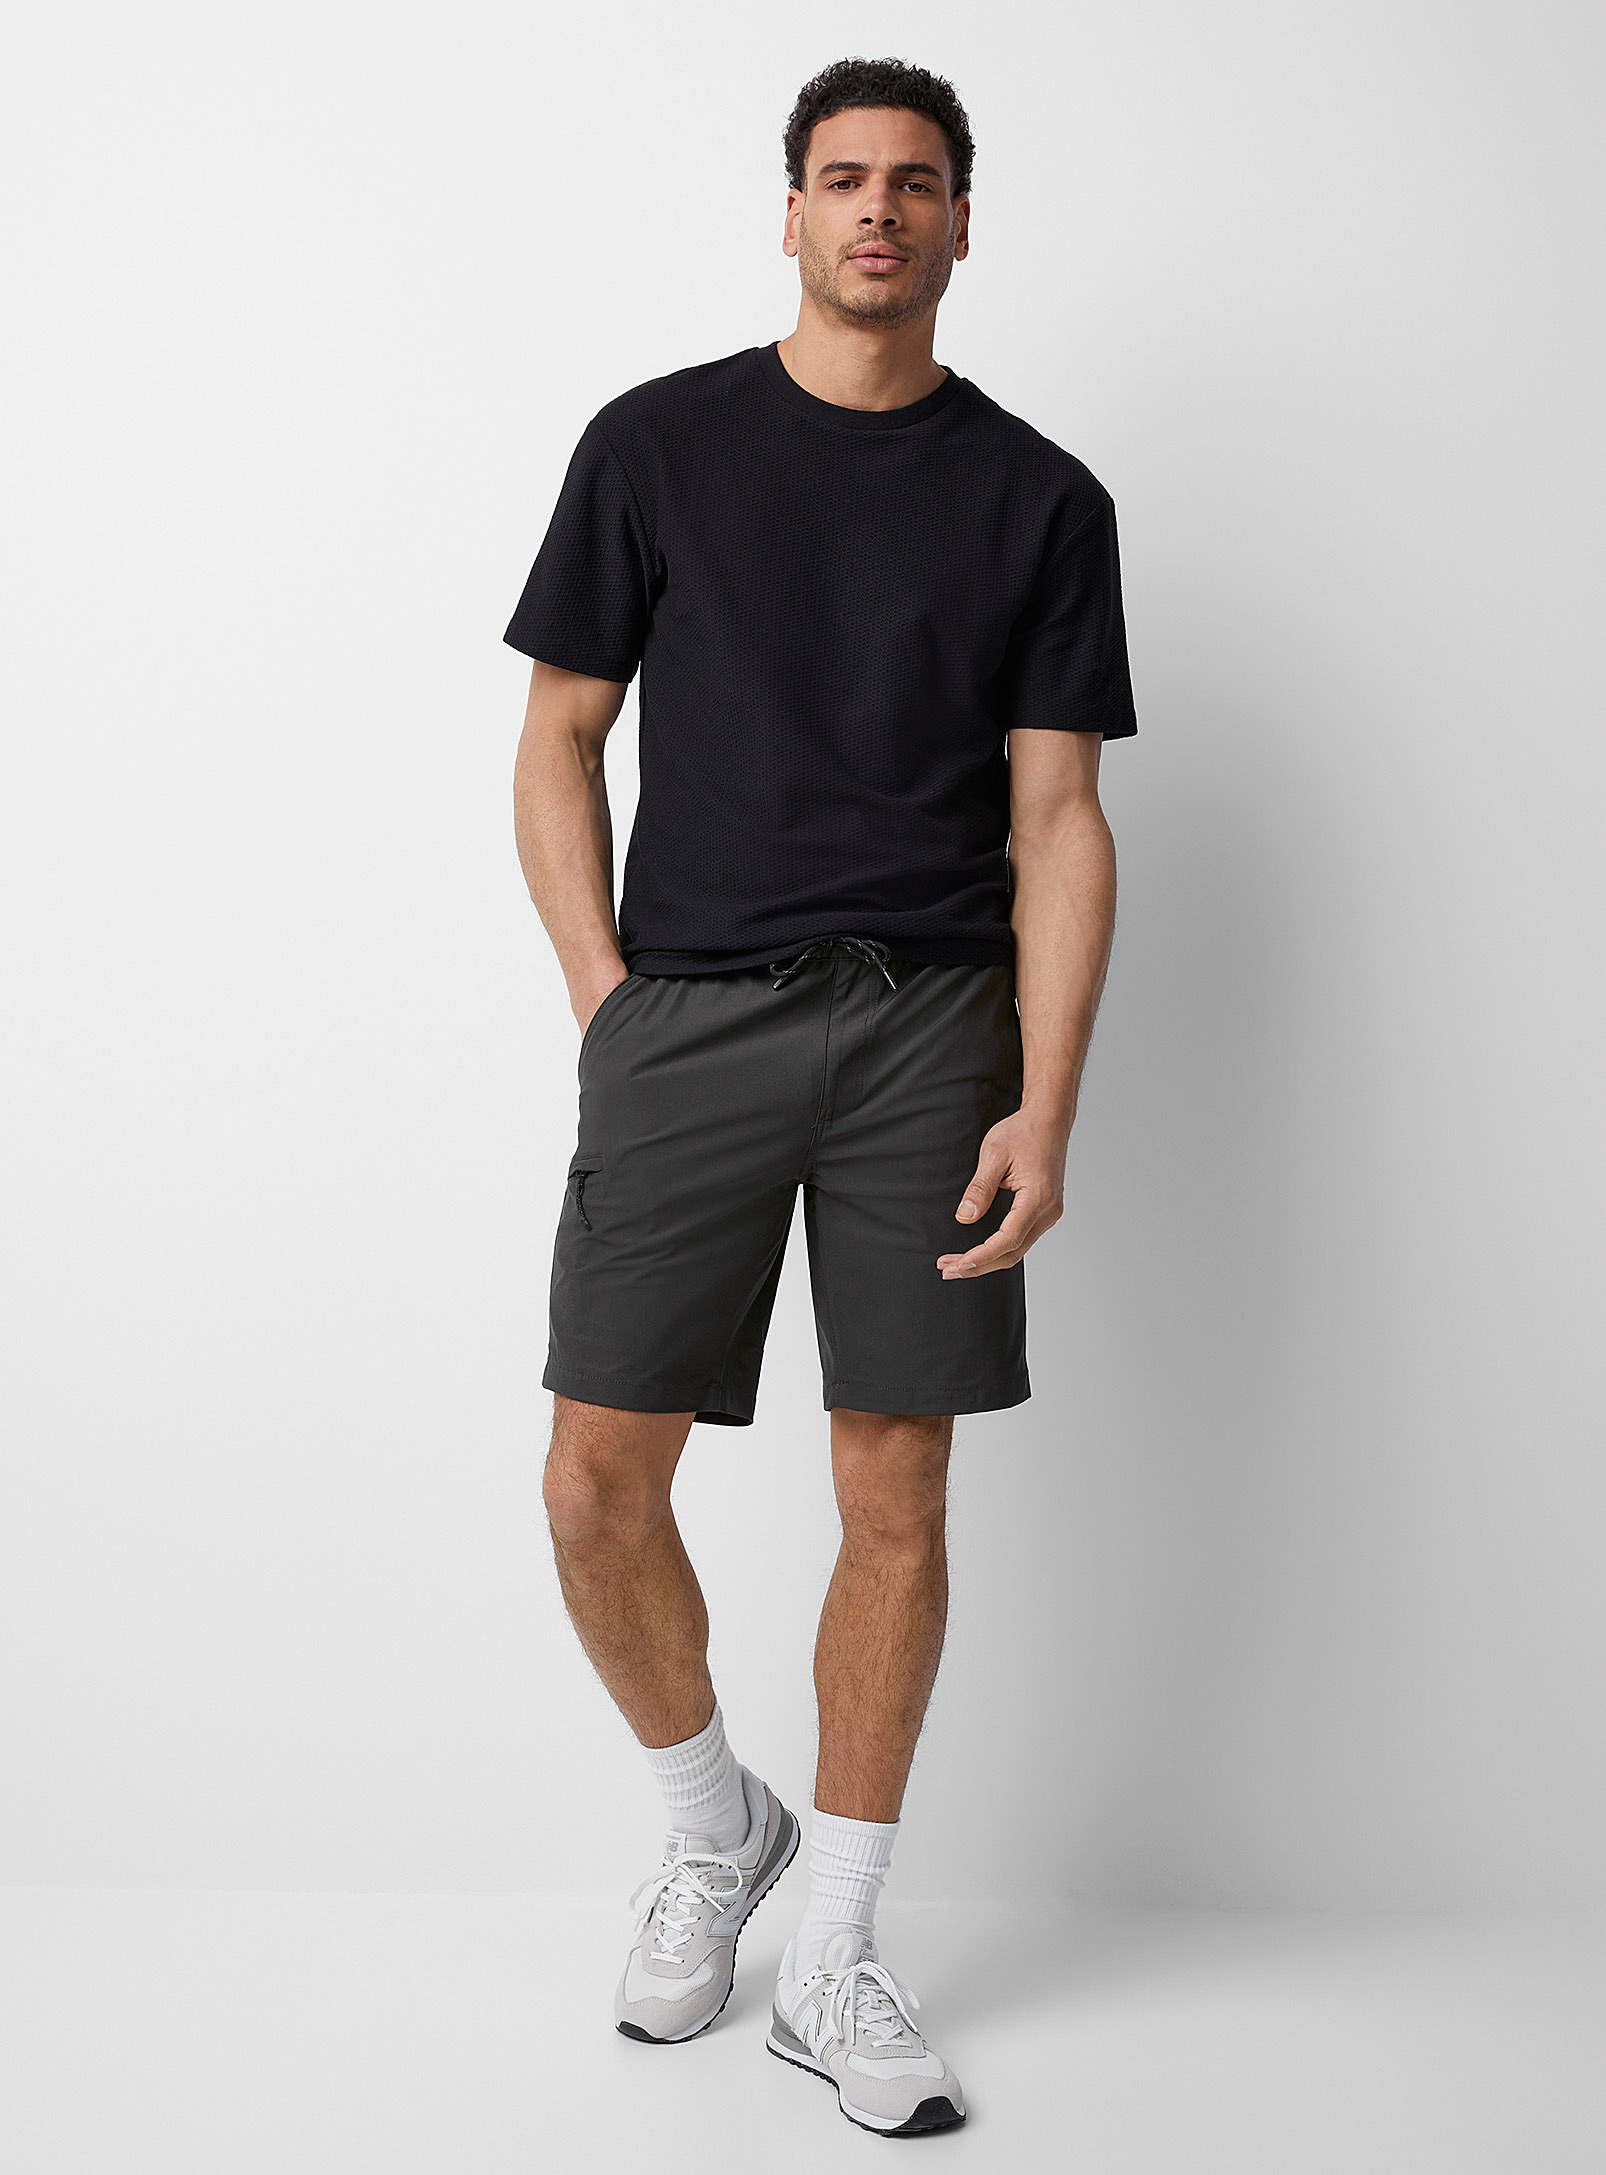 Projek Raw Comfort-waist Stretch Pull-on Short In Charcoal